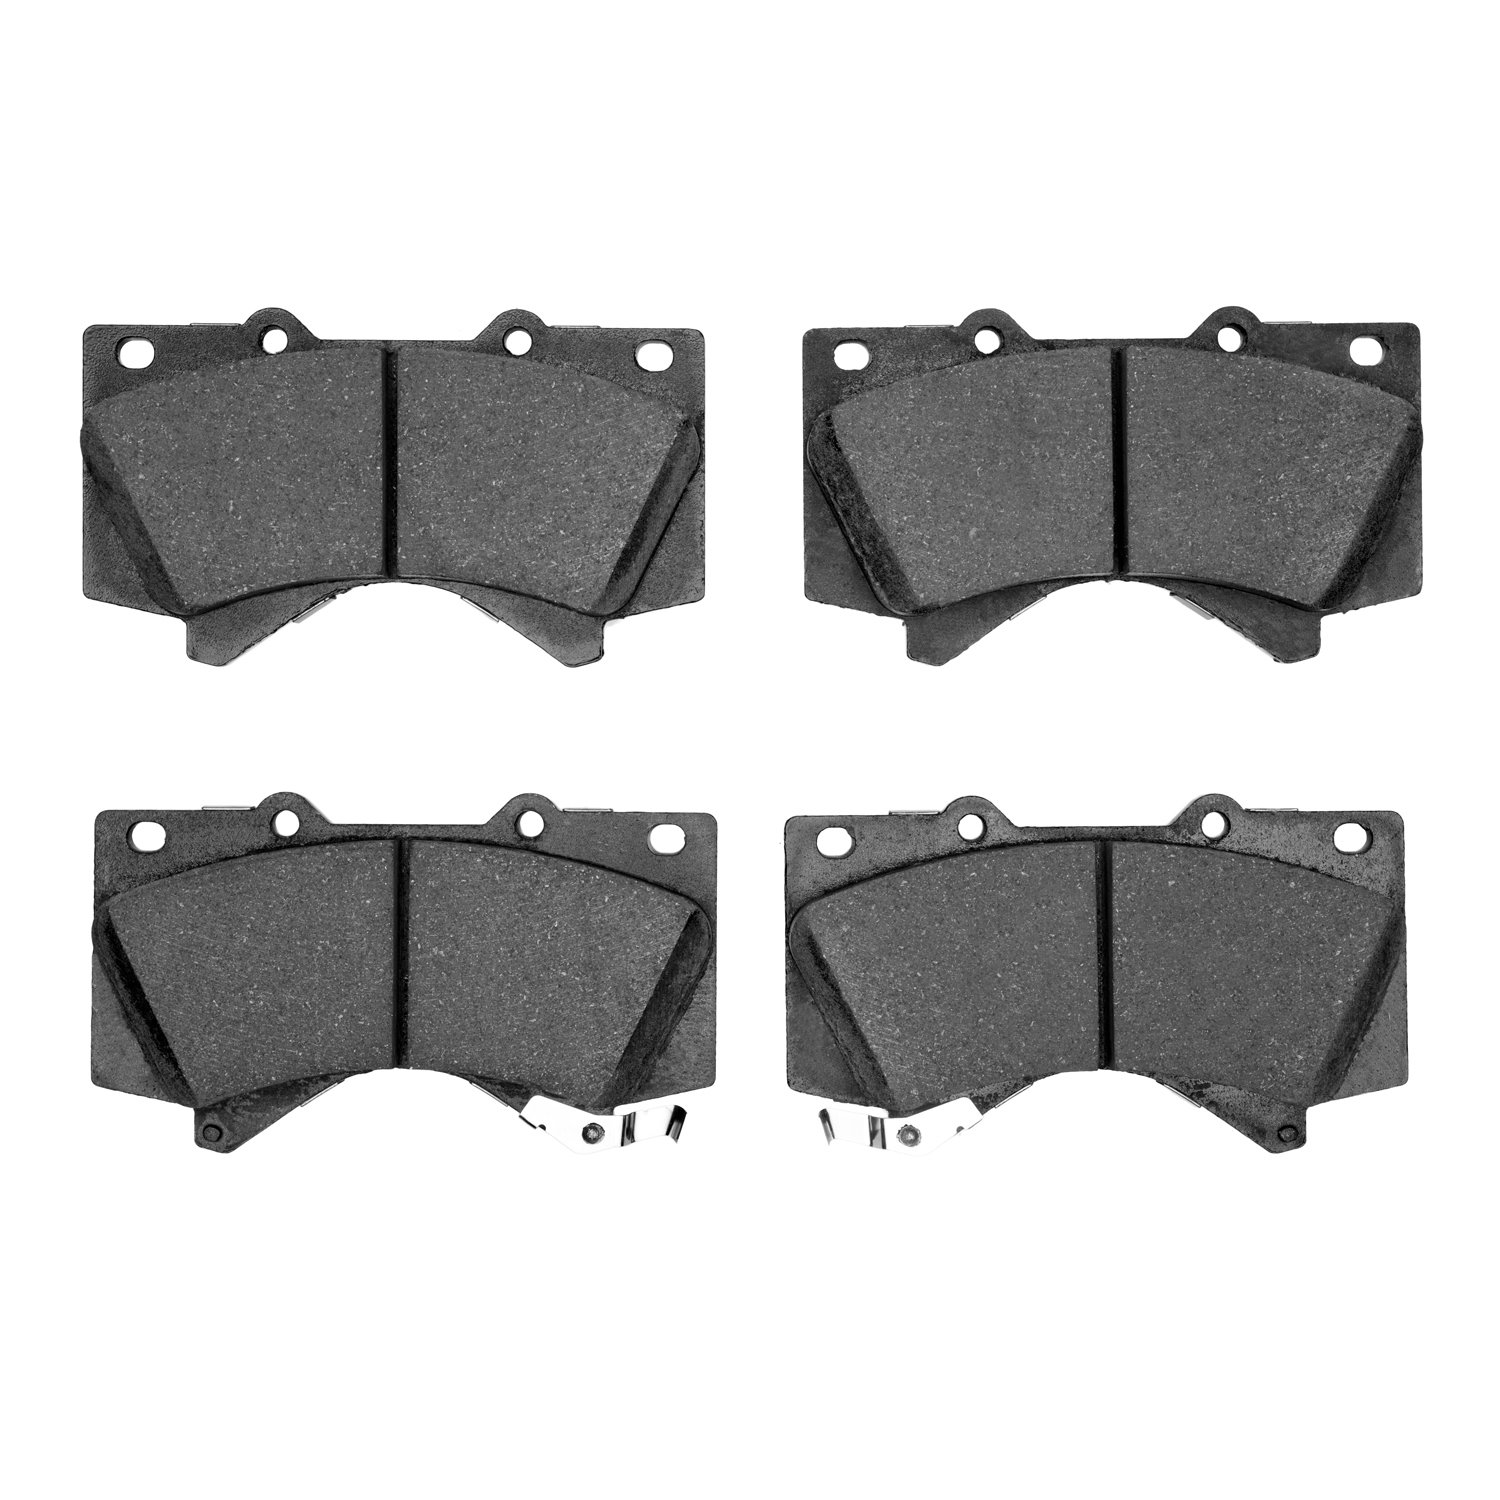 1400-1303-00 Ultimate-Duty Brake Pads Kit, Fits Select Lexus/Toyota/Scion, Position: Front